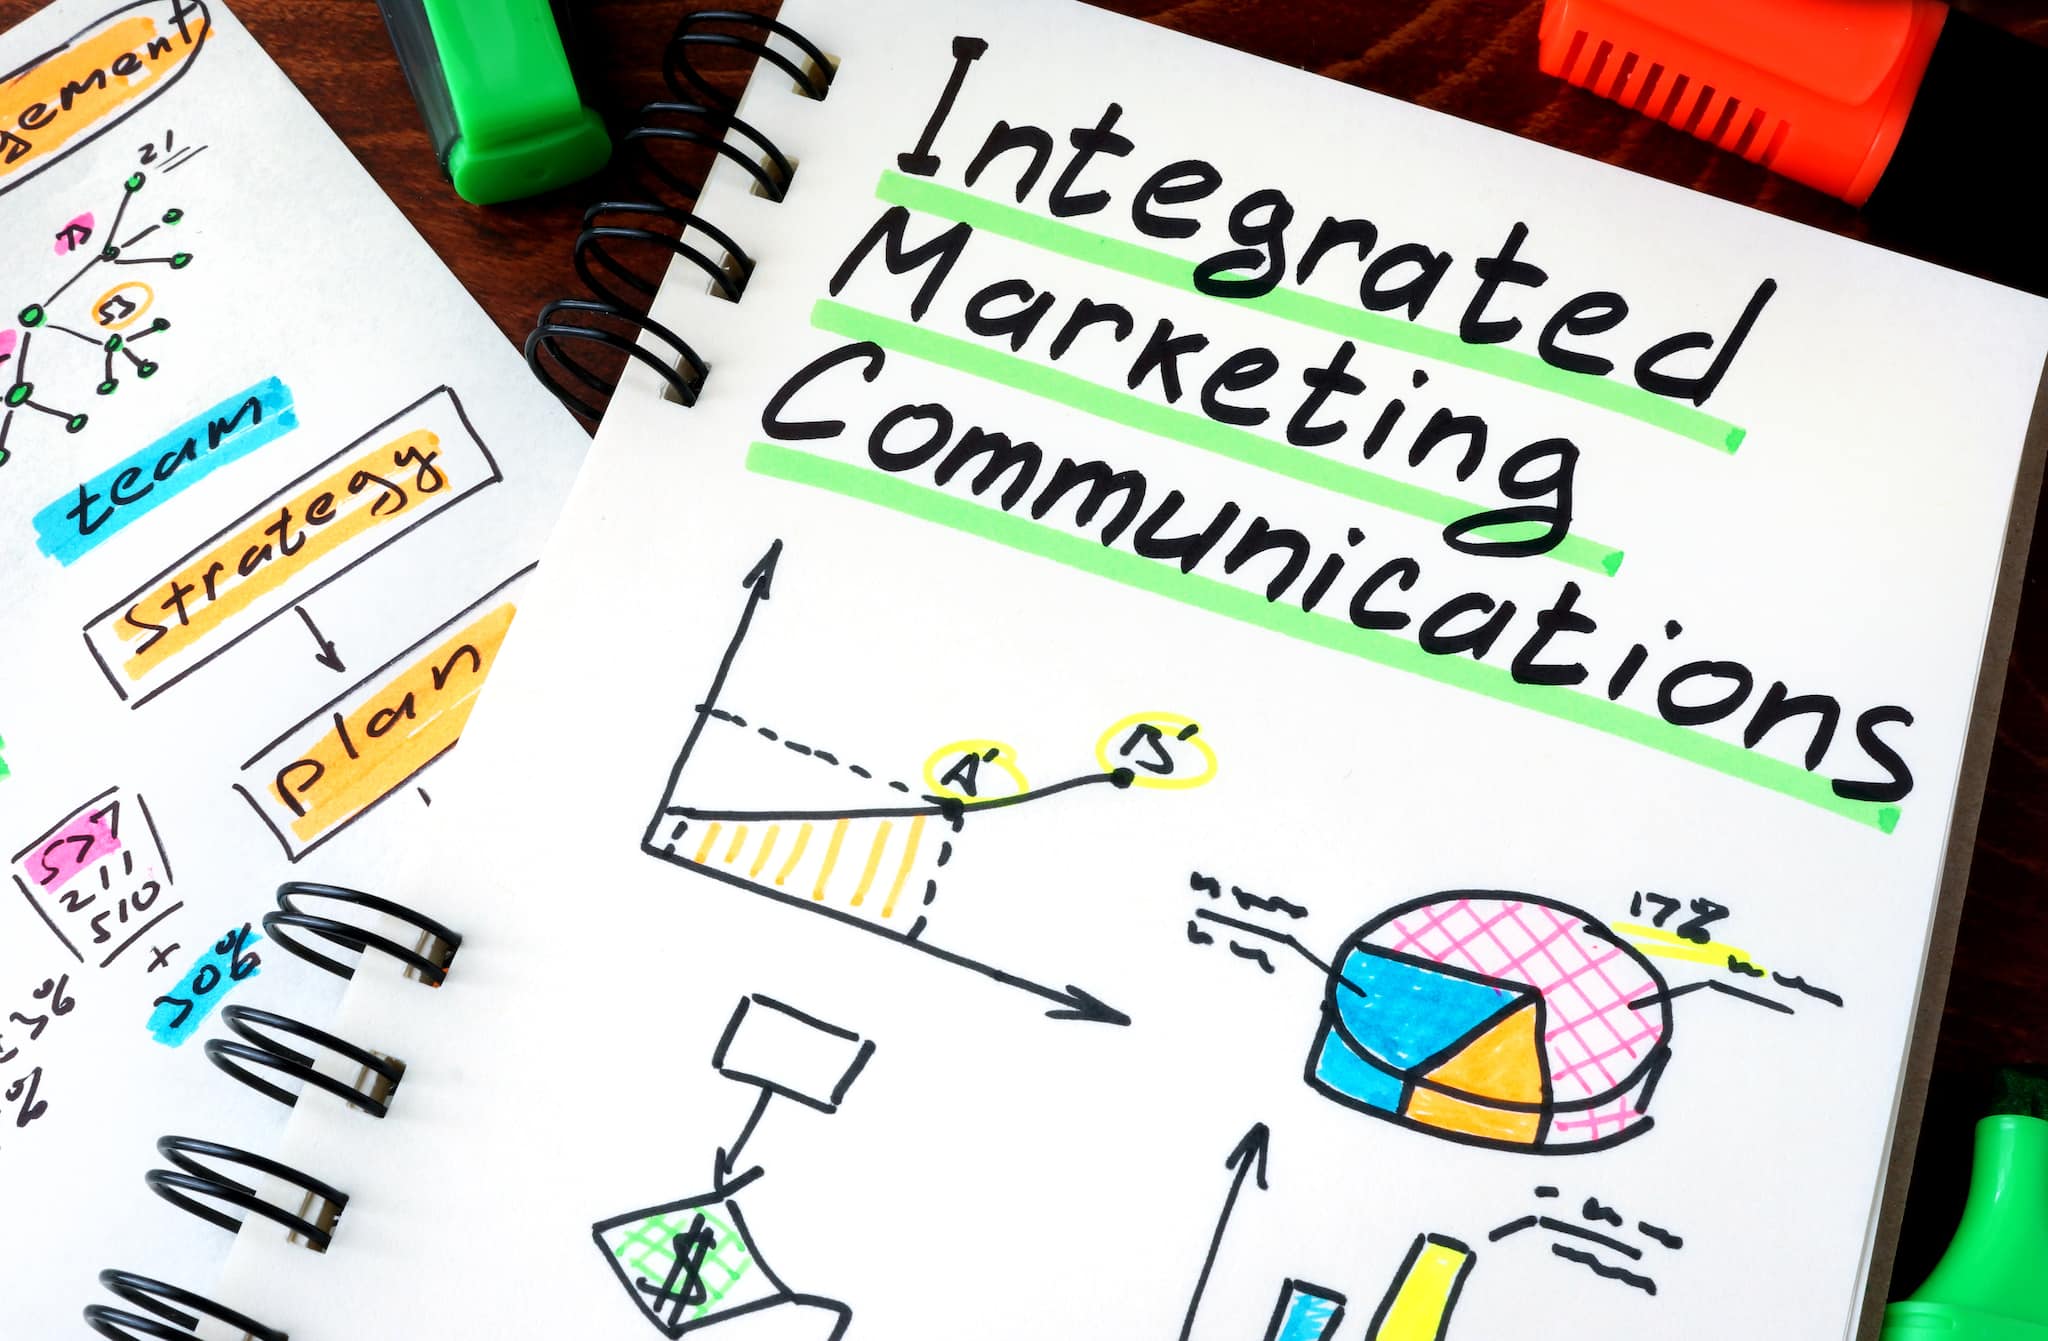 Here's how SMEs can smoothen path to integrate marketing communication